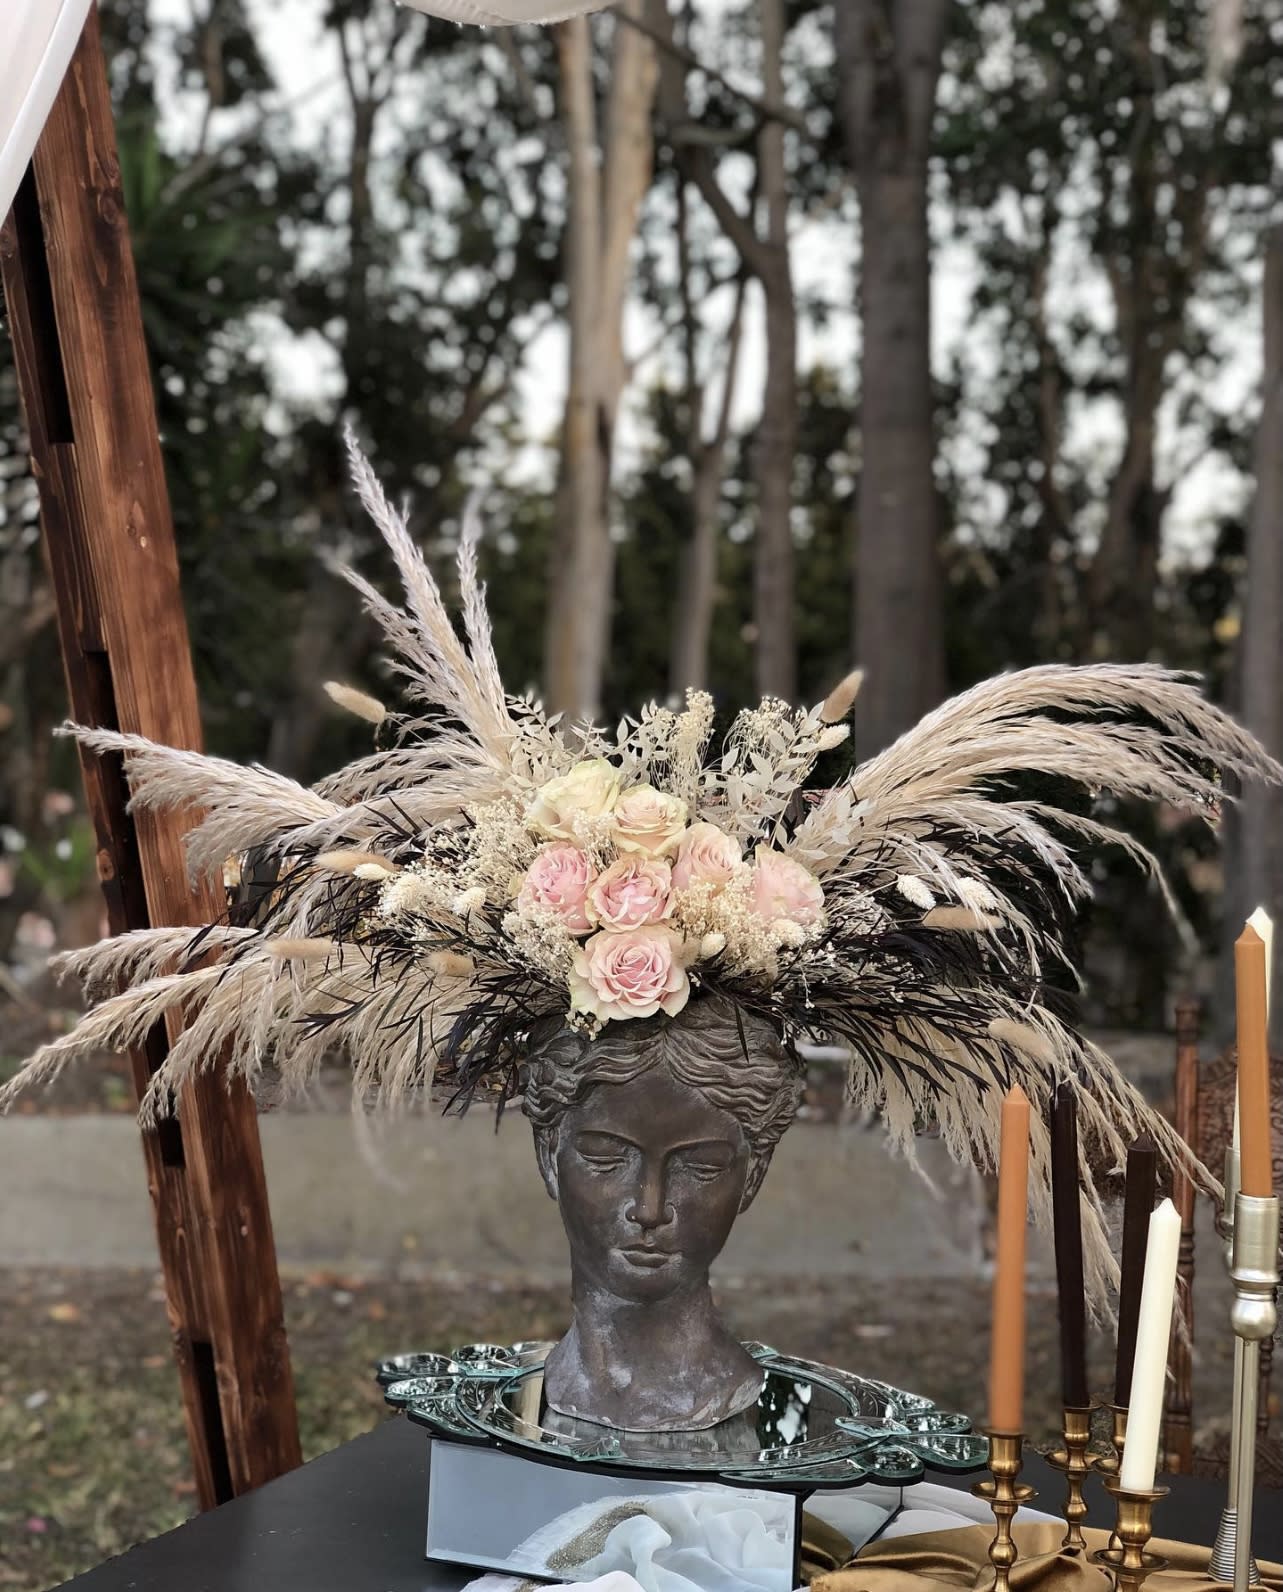 Mix Roses With Pampas grass And Unique Face Vase - 032